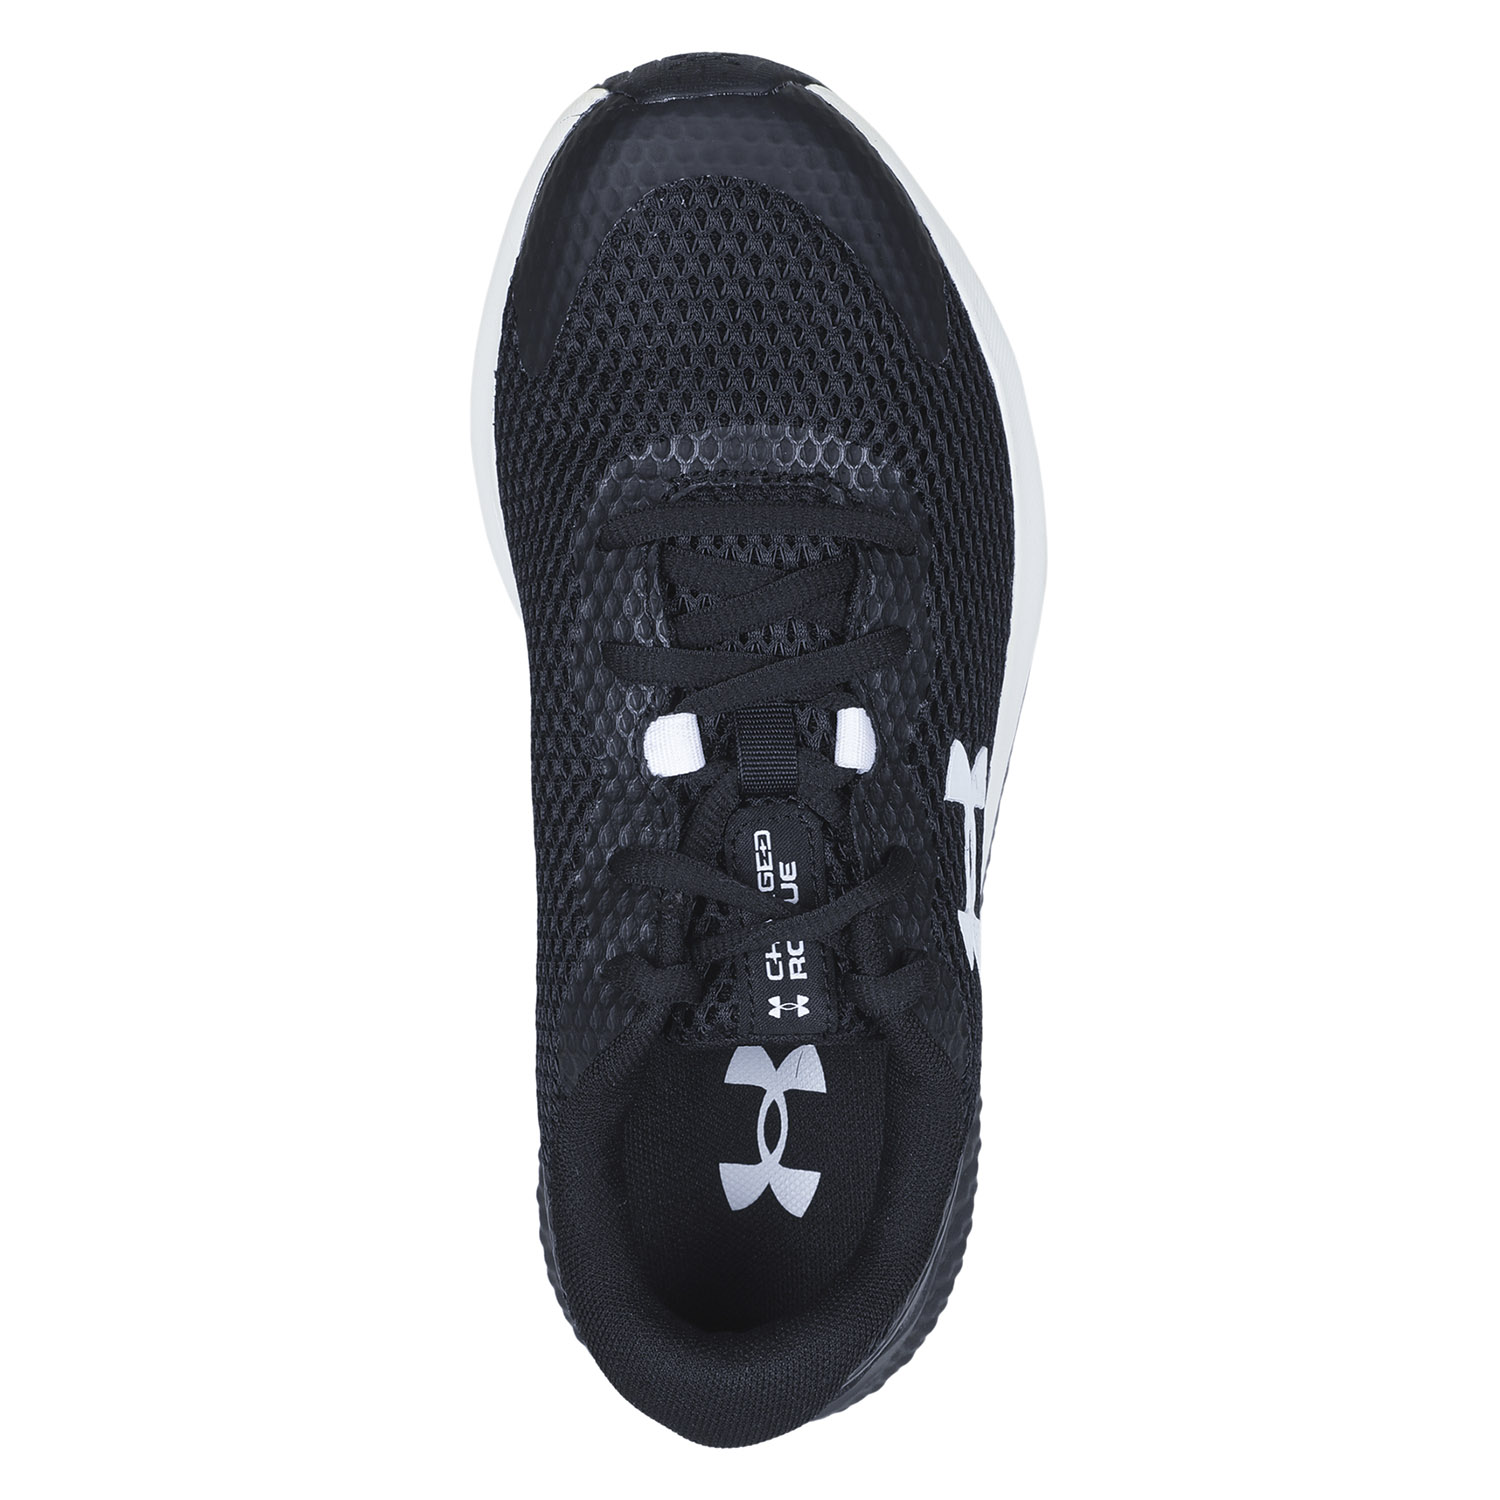 Кроссовки Under Armour Bgs Charged Rogue 3 Black/Black/White